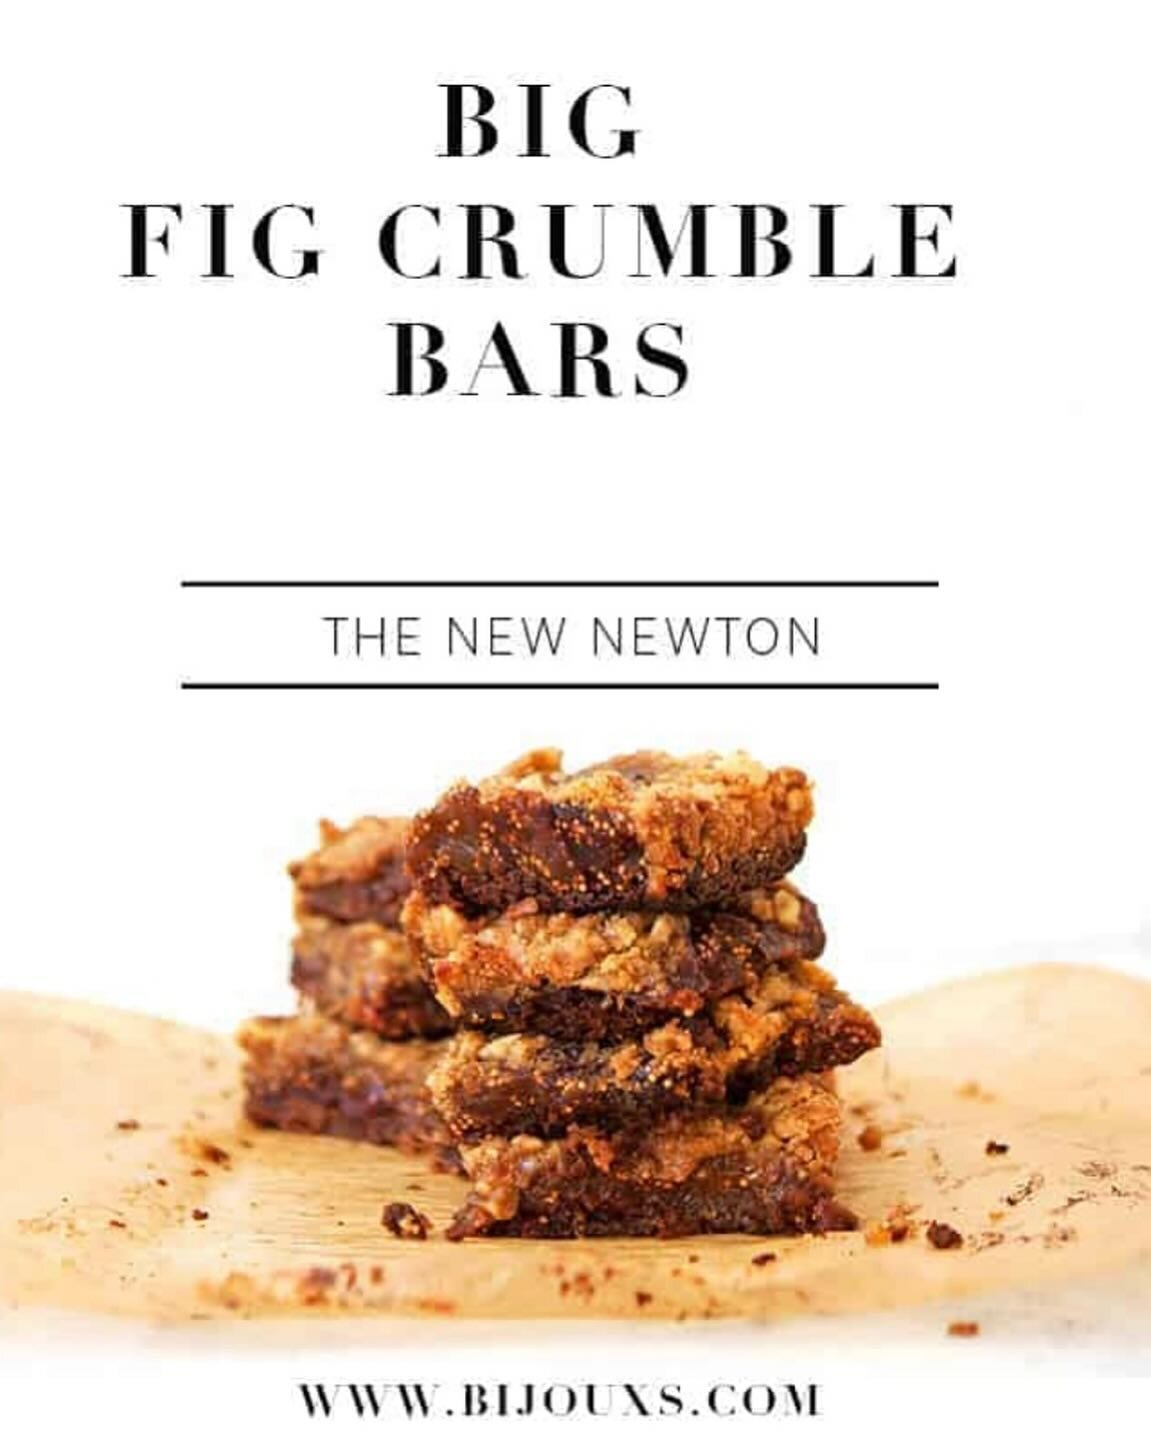 BEAUTIFUL FOOD BY DESIGN | These fresh fig crumble bars are not your typical Newton. Buttery, jammy and soft they are a rich addition to a lunch box or afternoon snack with a cup of tea. Big Fig Crumble Bars, another little jewel from the Bijouxs kit